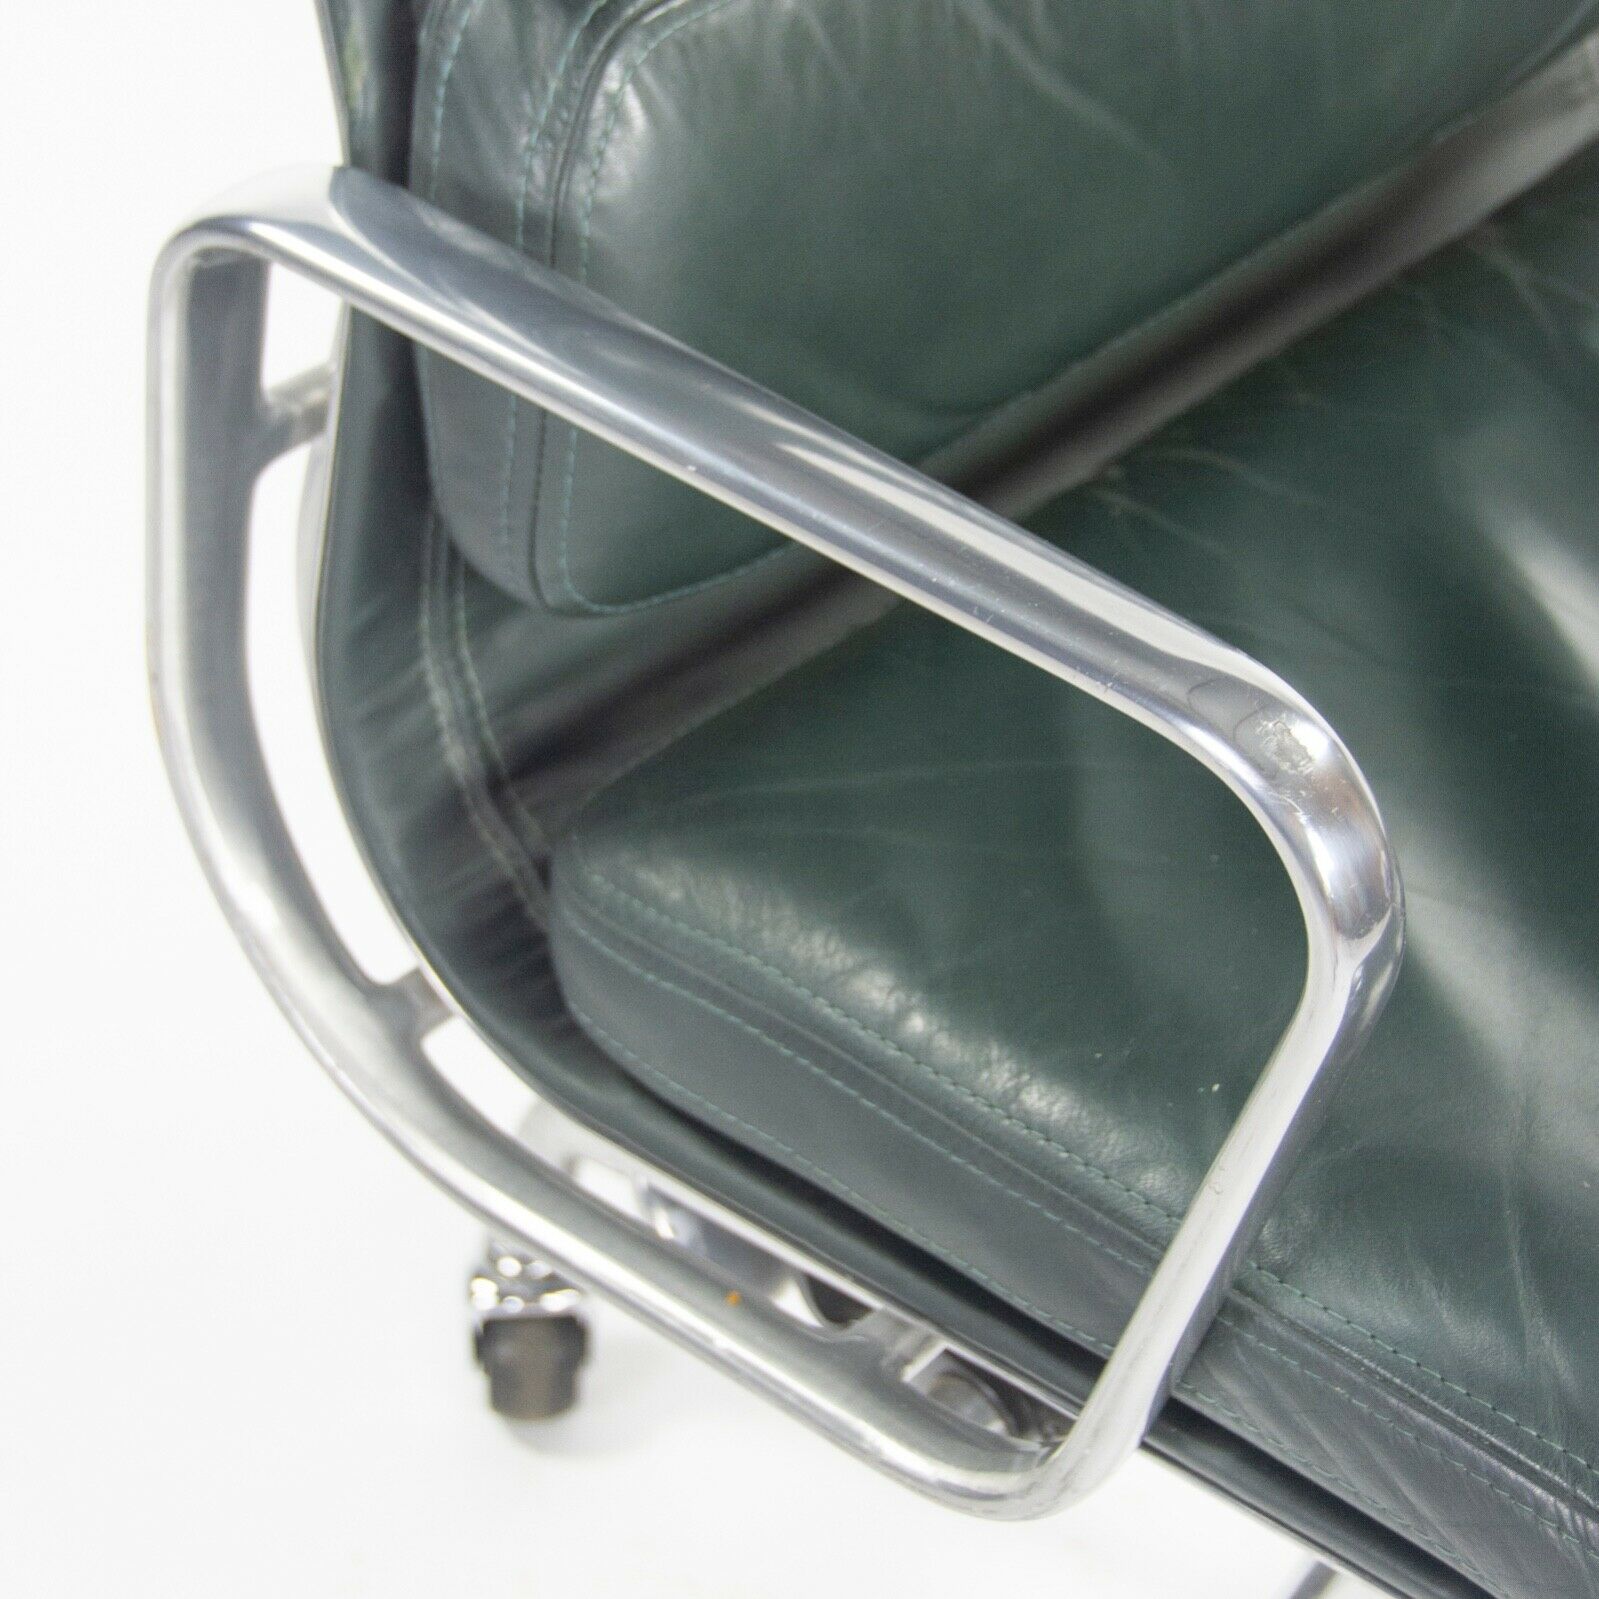 SOLD 1980s Herman Miller Eames Aluminum Group Soft Pad Management Desk Chair in Green Leather